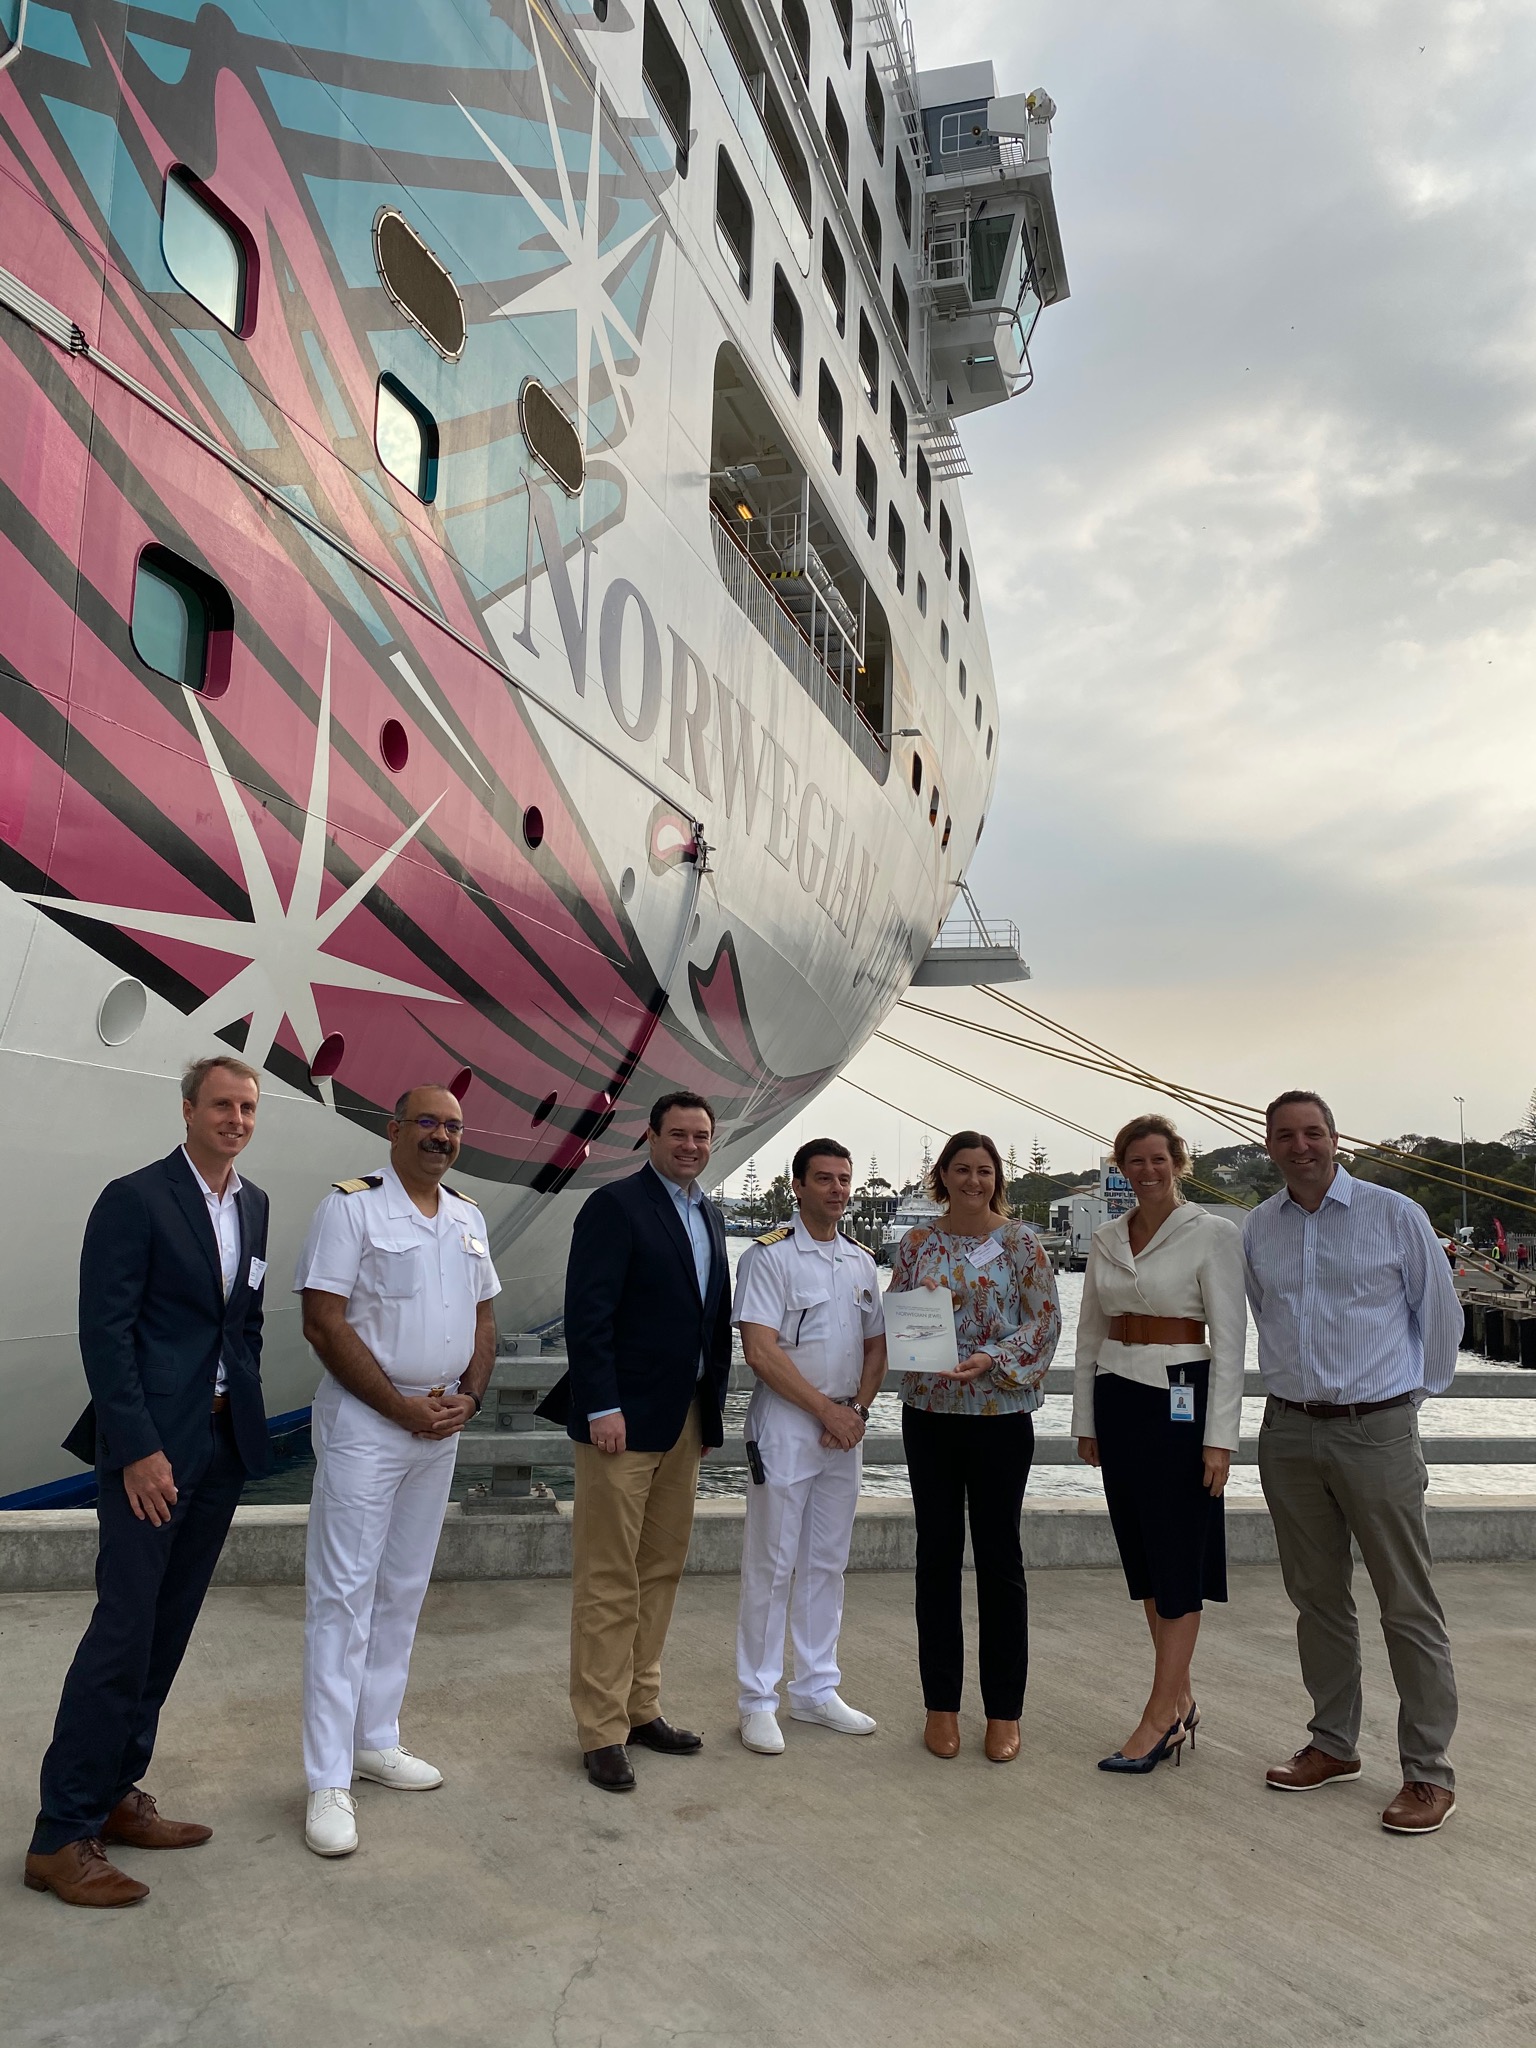 Norwegian Jewel sparkles as first cruise visitor as Eden reopens